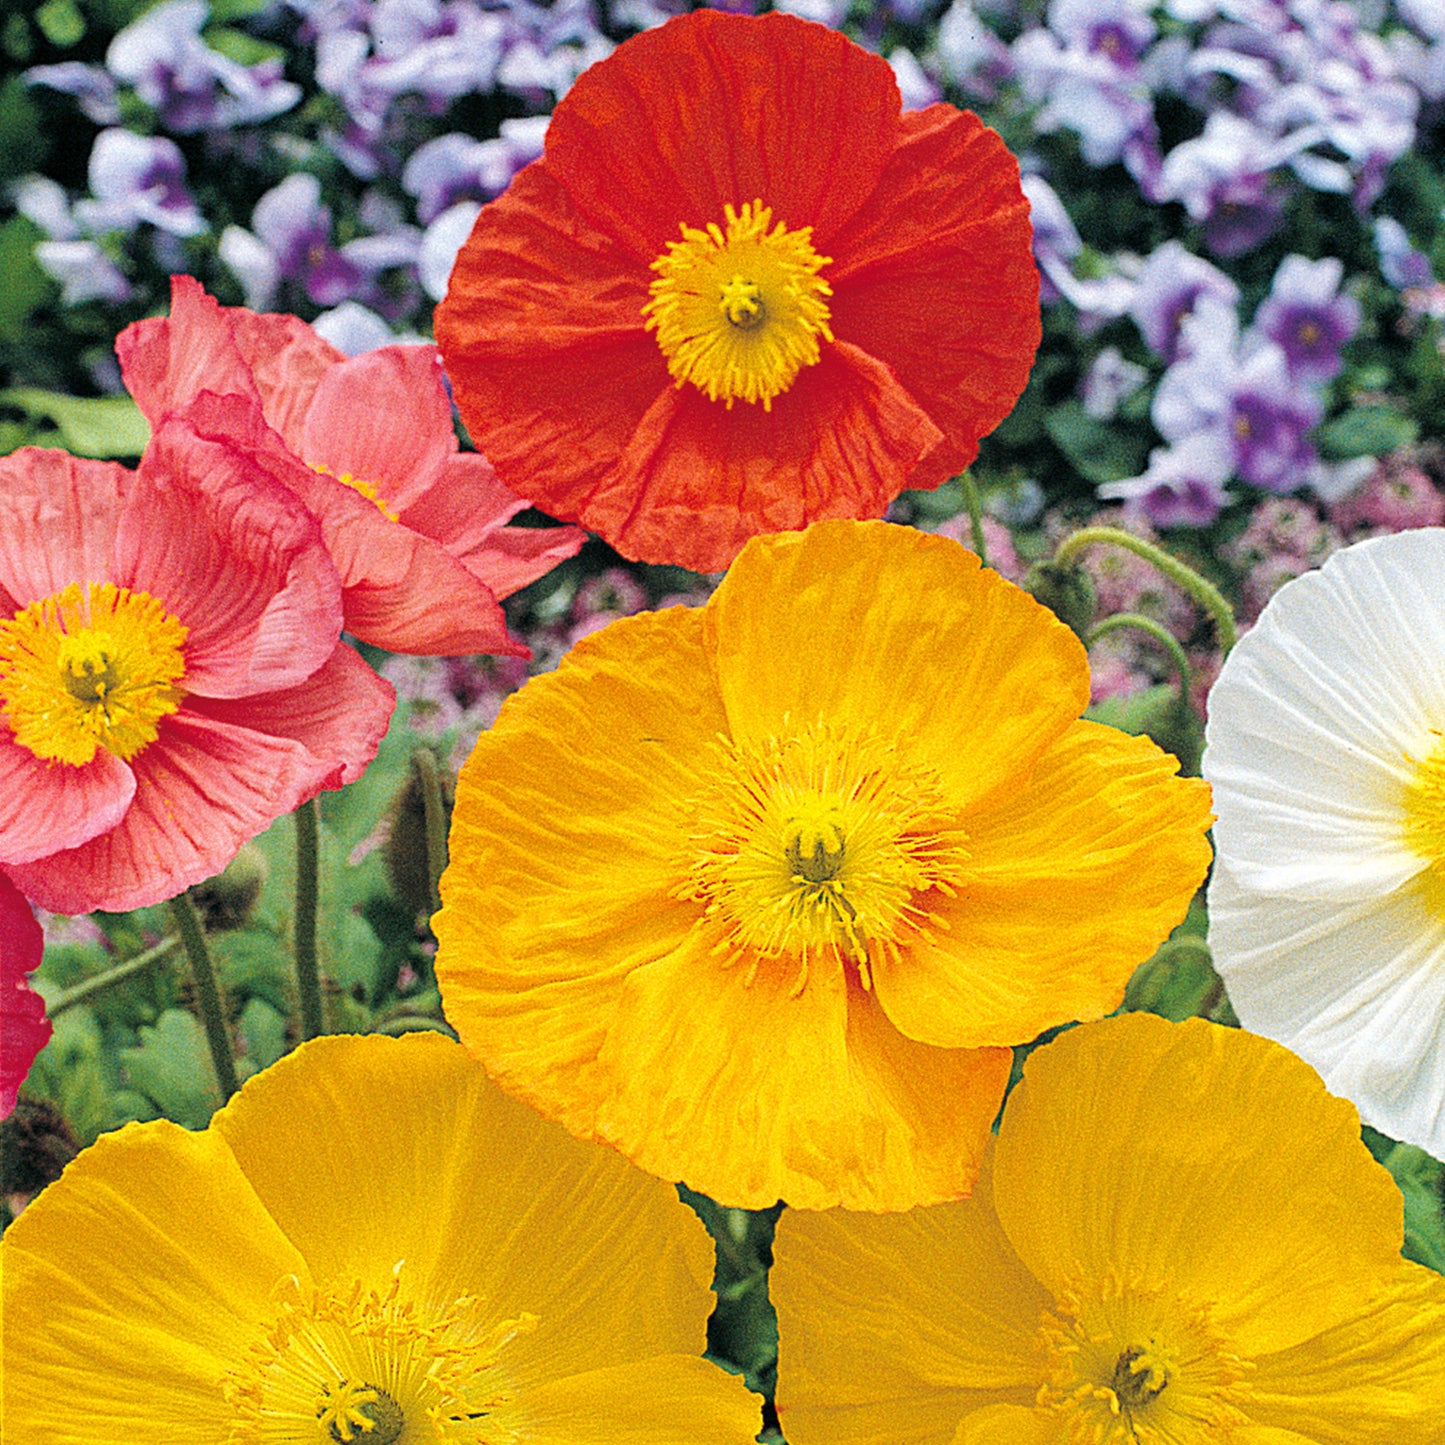 Mixed Colors Iceland Poppy Flowers matured and blooming their beautifully, silk textured blooms in colors of white, salmon pink, red and yellow.